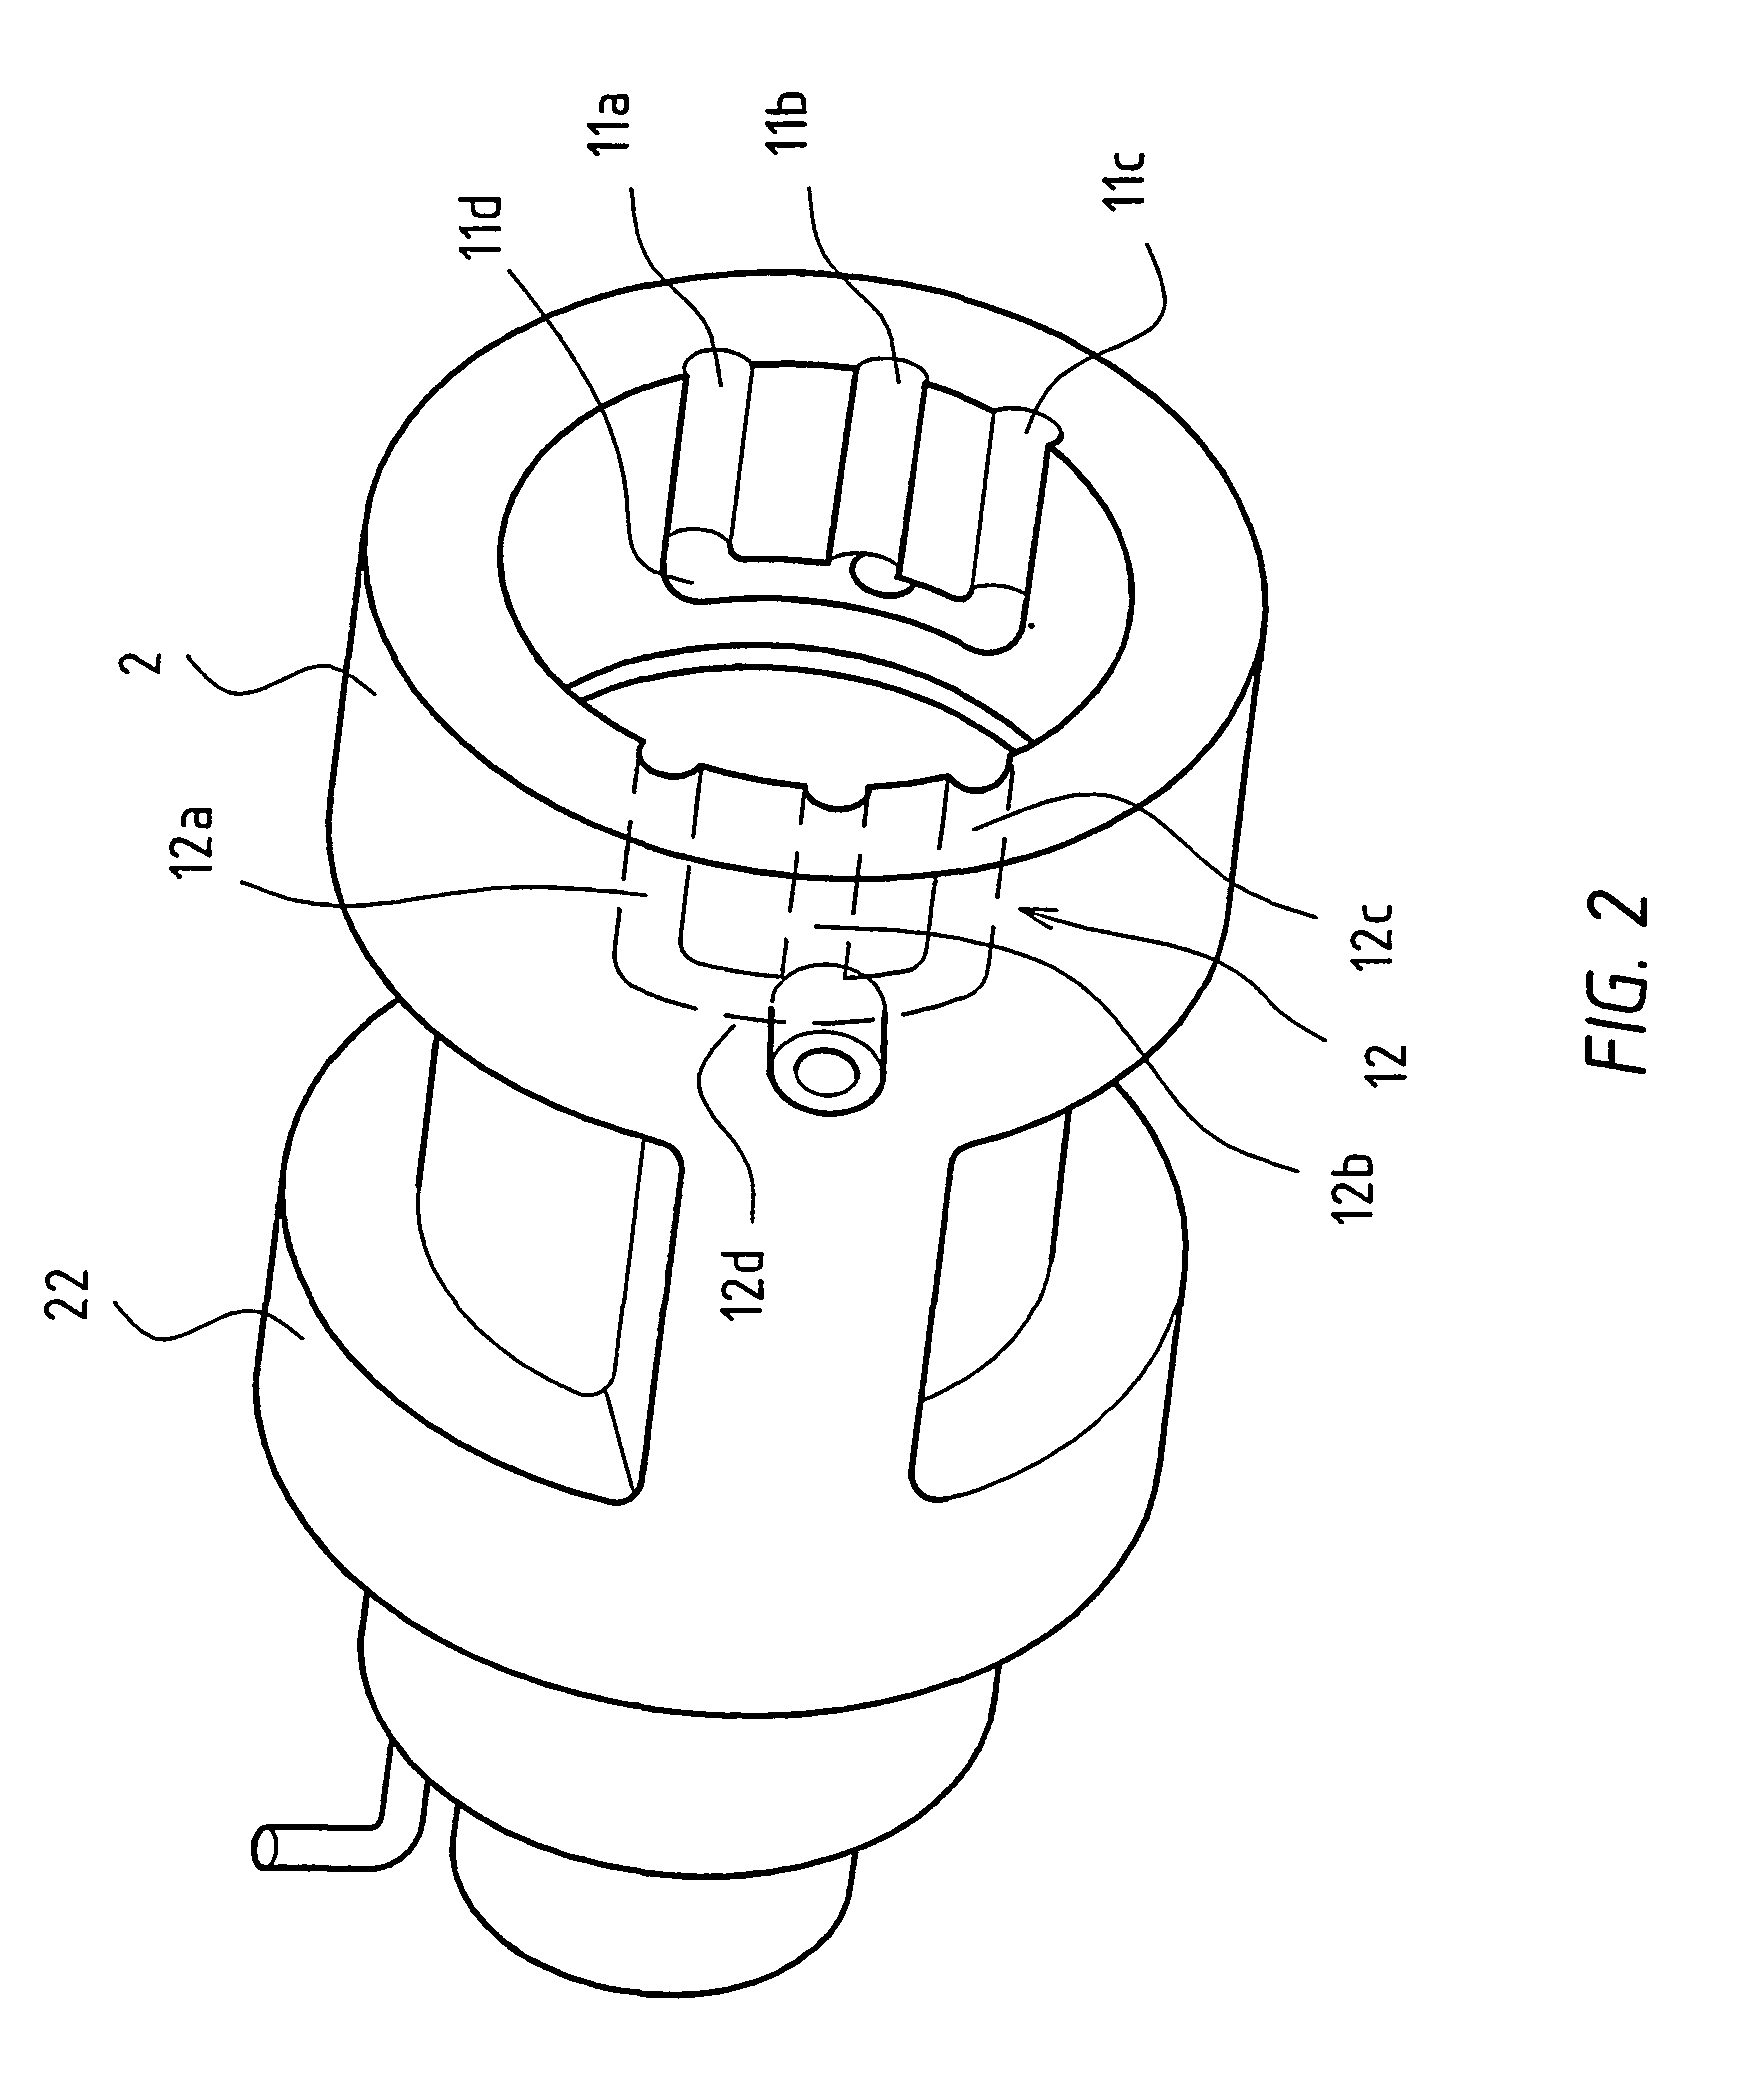 Device and method for separating meat from bone parts